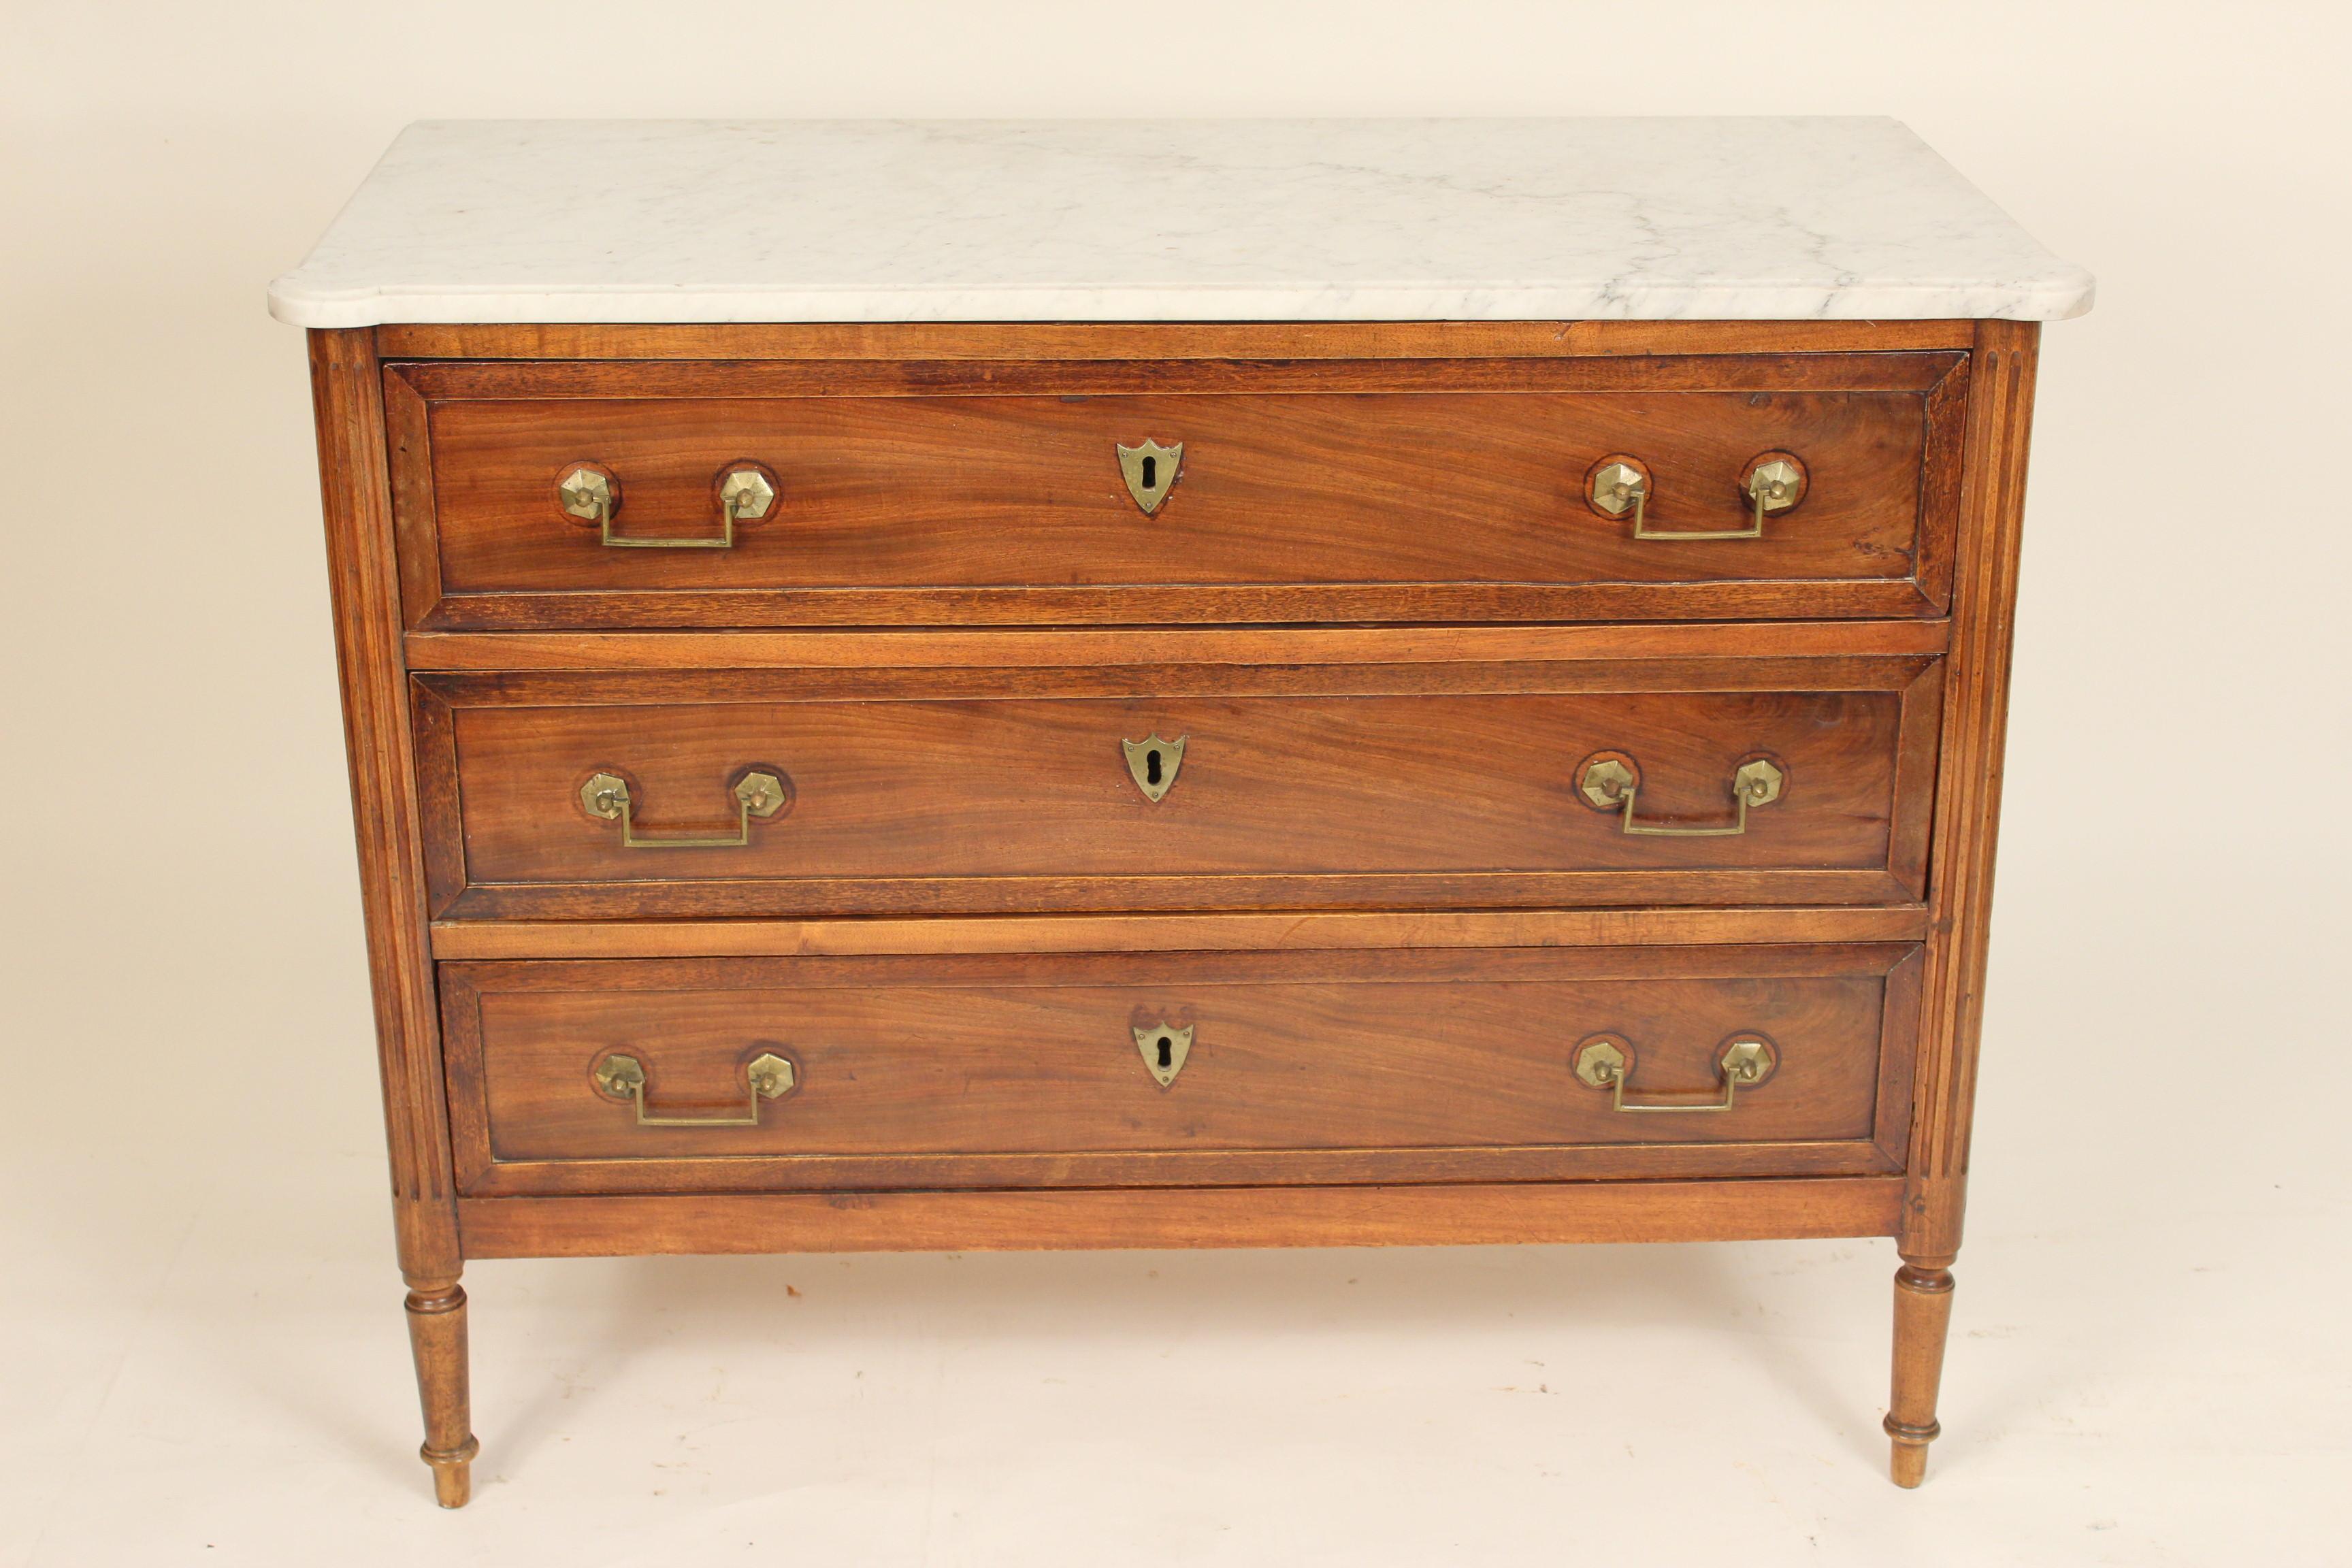 Antique Louis XVI style mahogany chest of drawers with marble top and brass hardware, late 19th century.